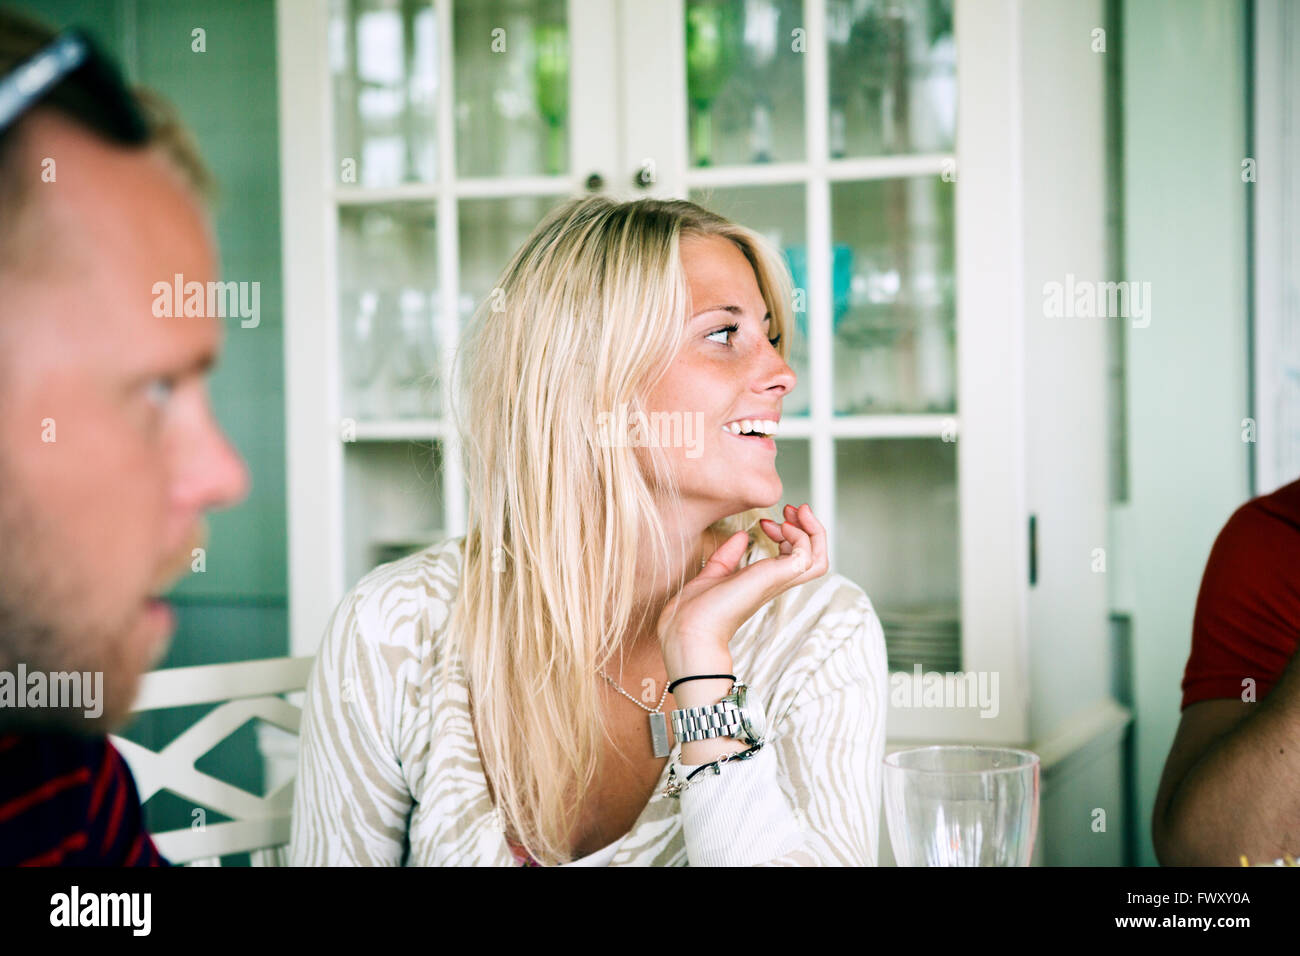 Smiling young woman talking with friends Stock Photo